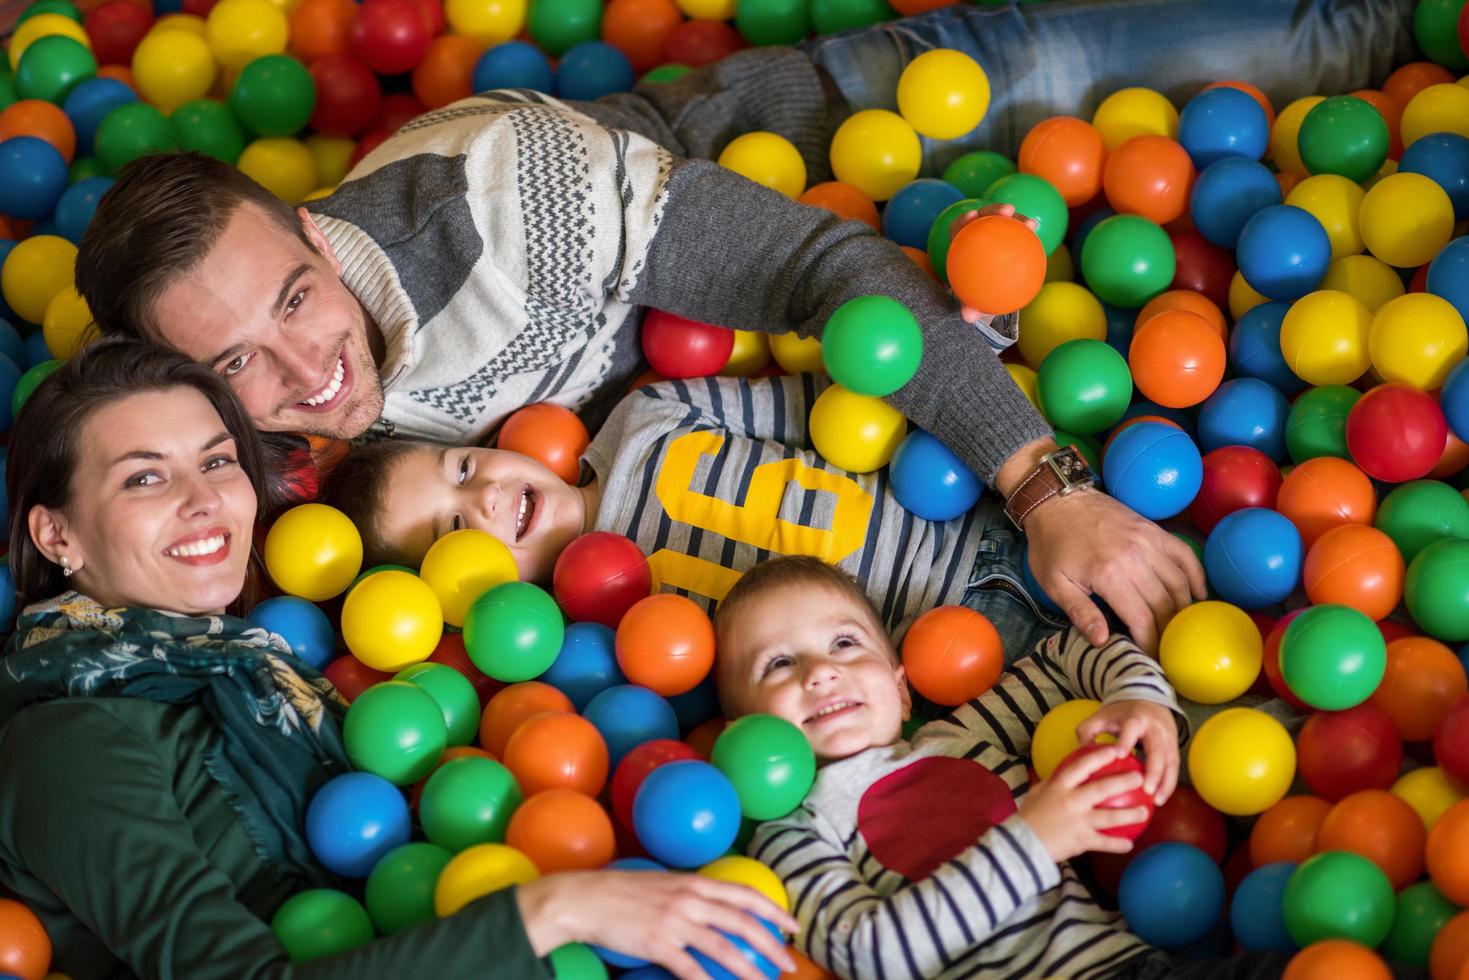 parents and kids playing in the pool with colorful balls photo